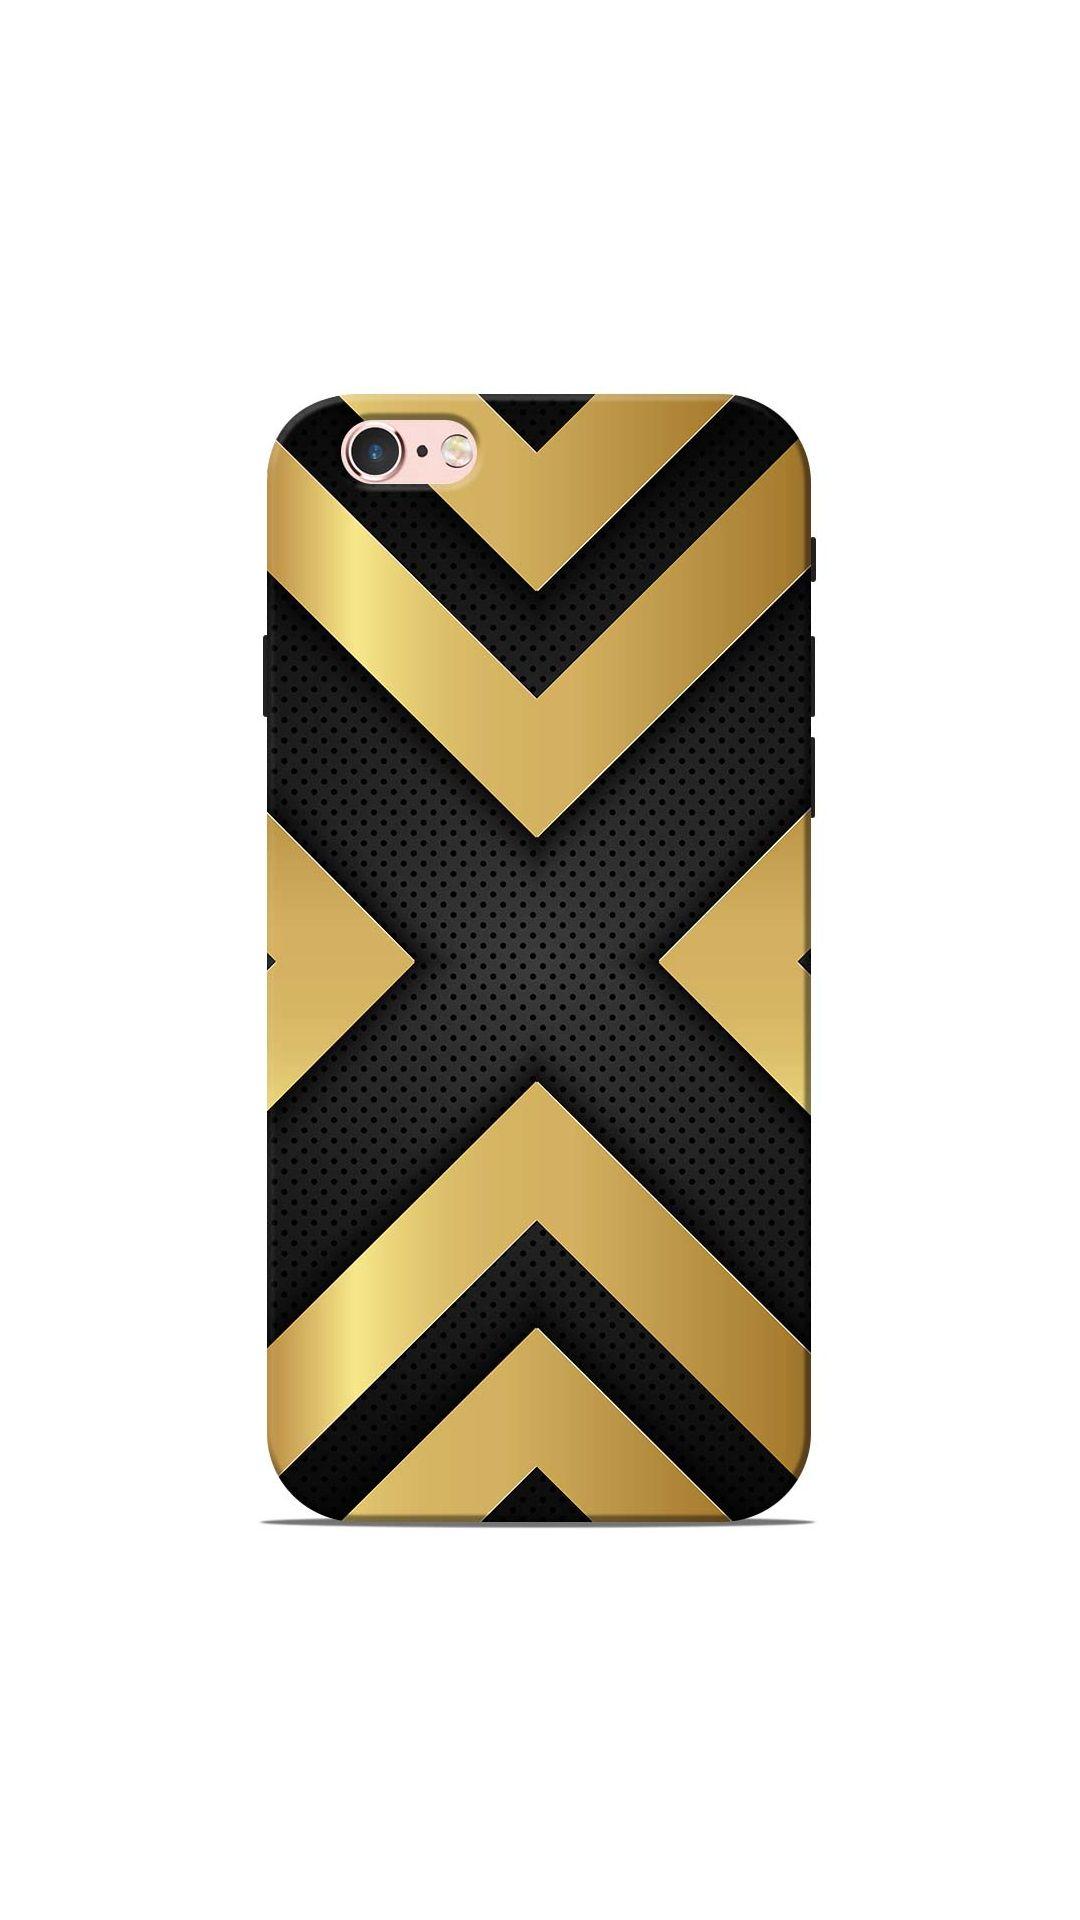 Golden X Logo - Buy Apple iPhone 6 Back Cover and Cases - Golden X